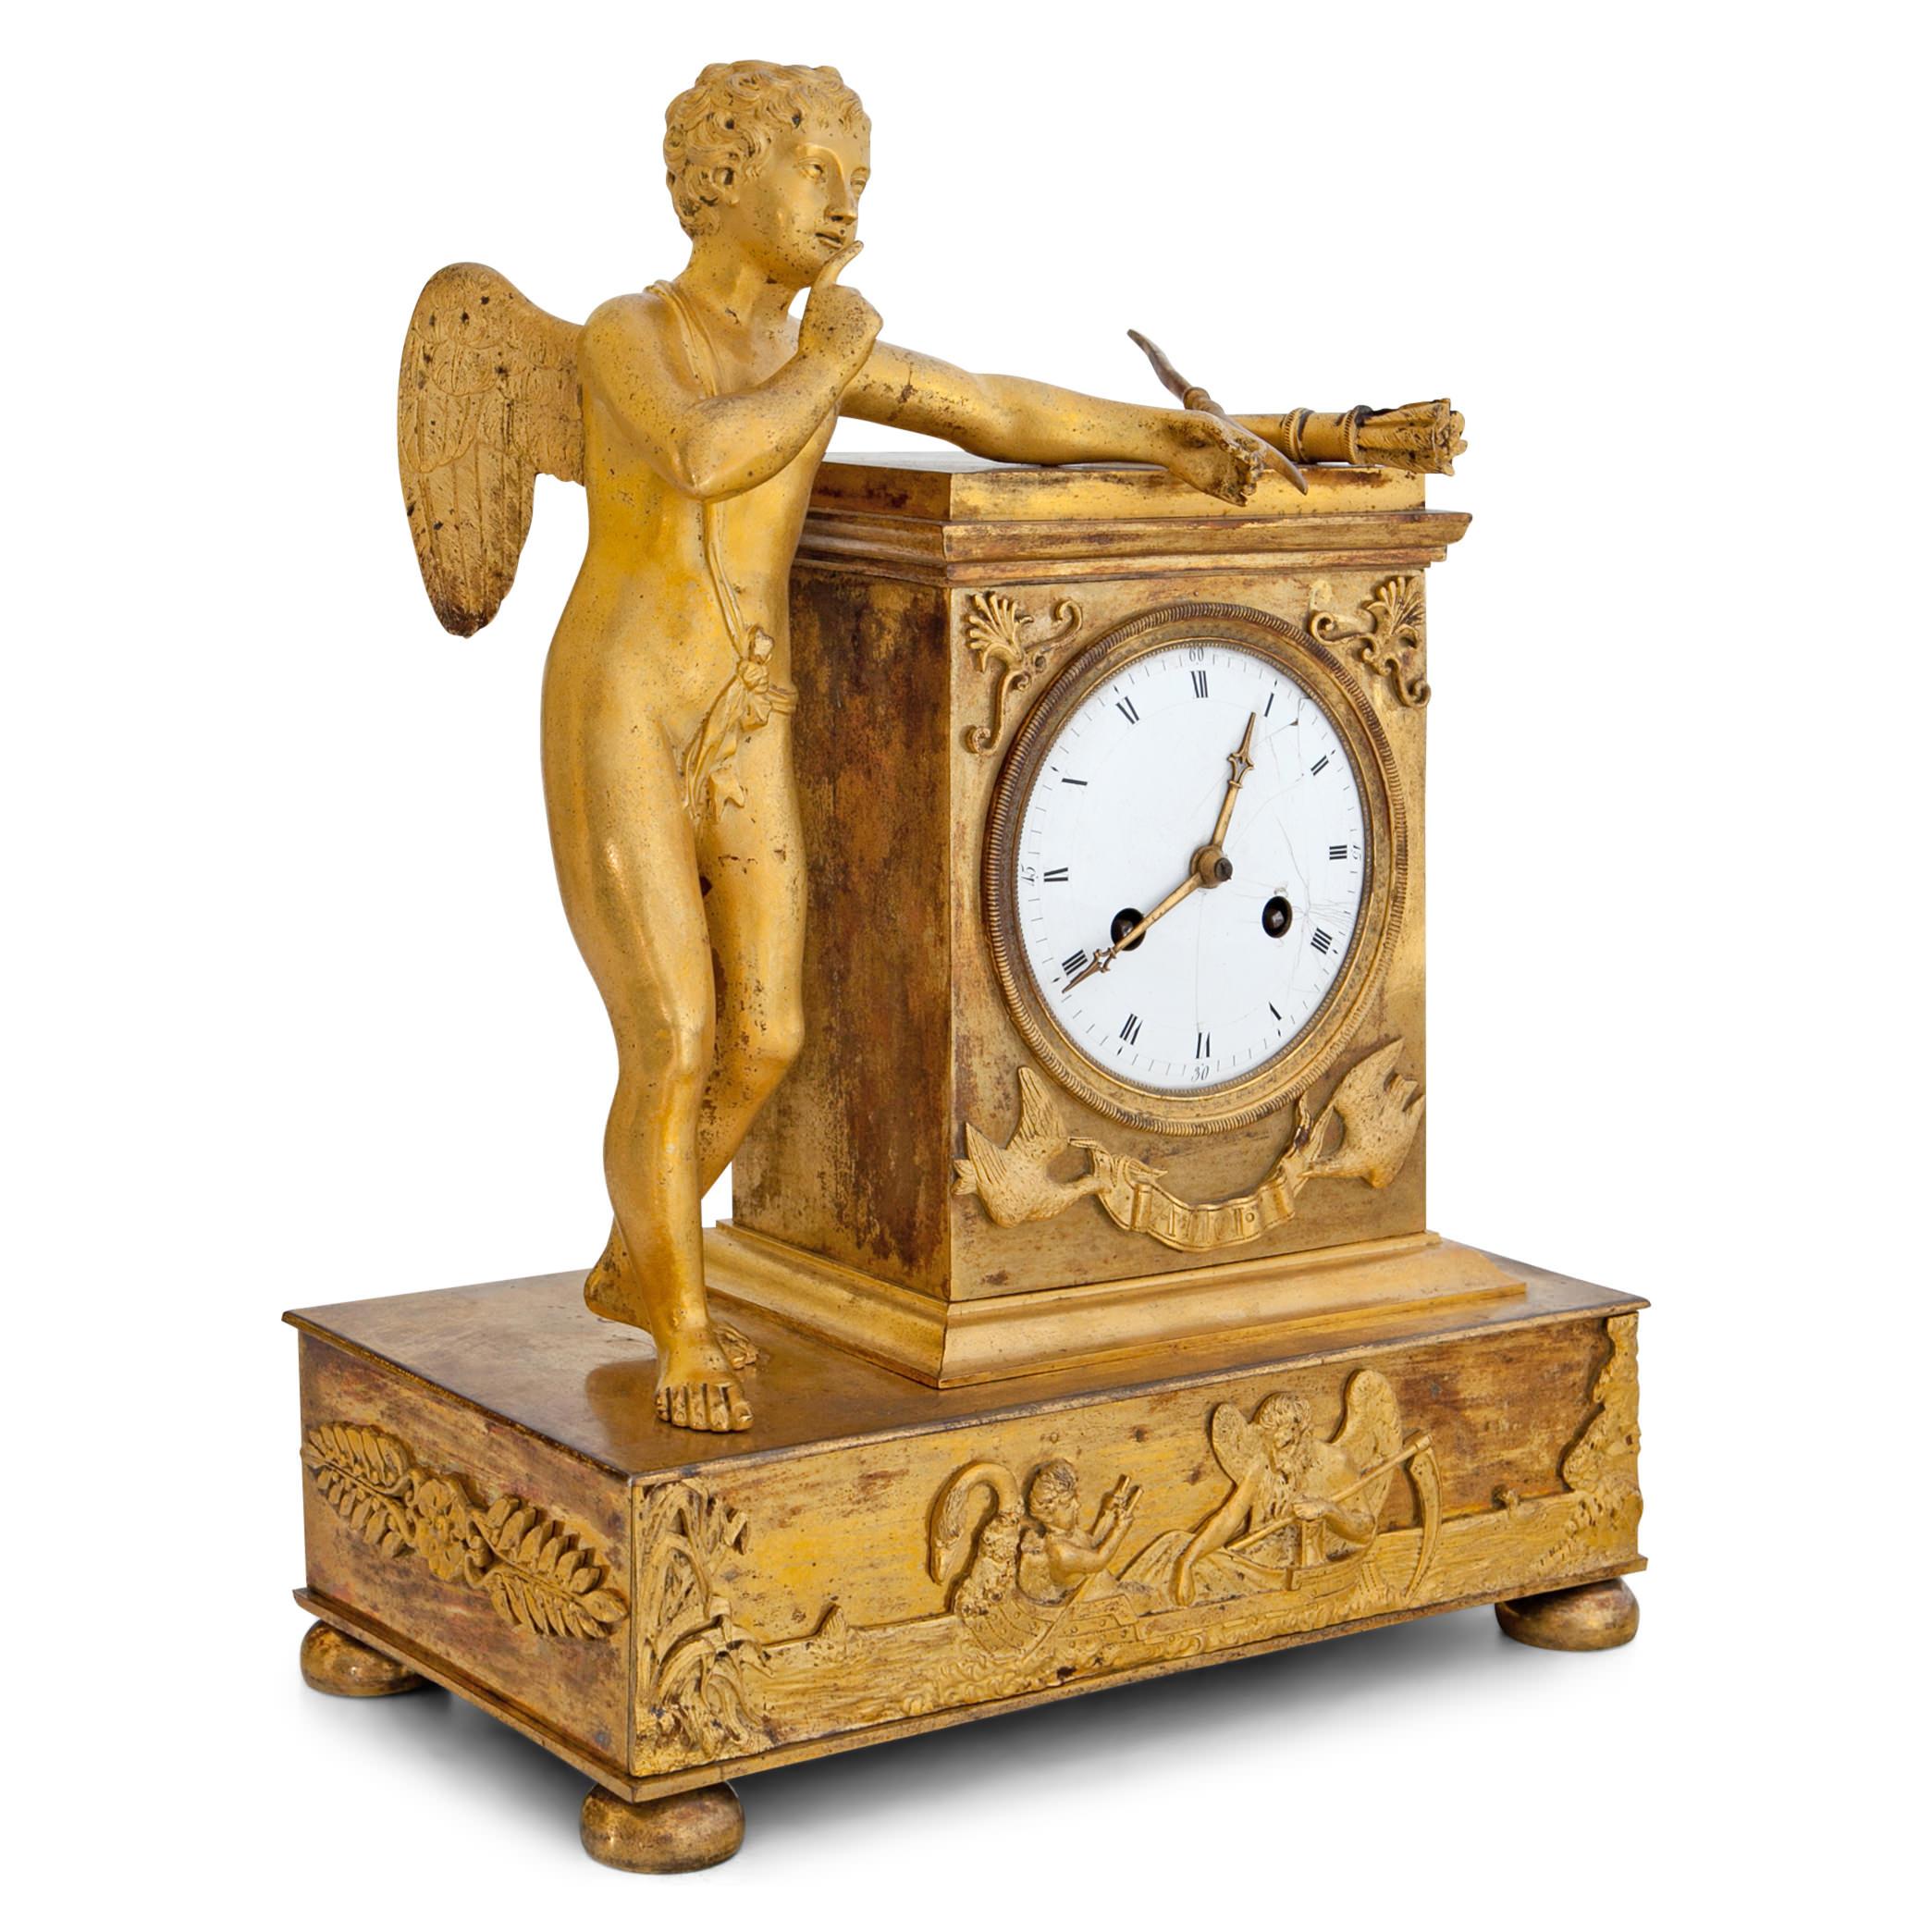 French Empire mantel clock with cupid, holding a ring between is index finger and thumb. He placed his bow and arrows casually on the clock case, that identifies him as “Amor” towards the base. In the spirit of “Love outlasts the test of Time”: The